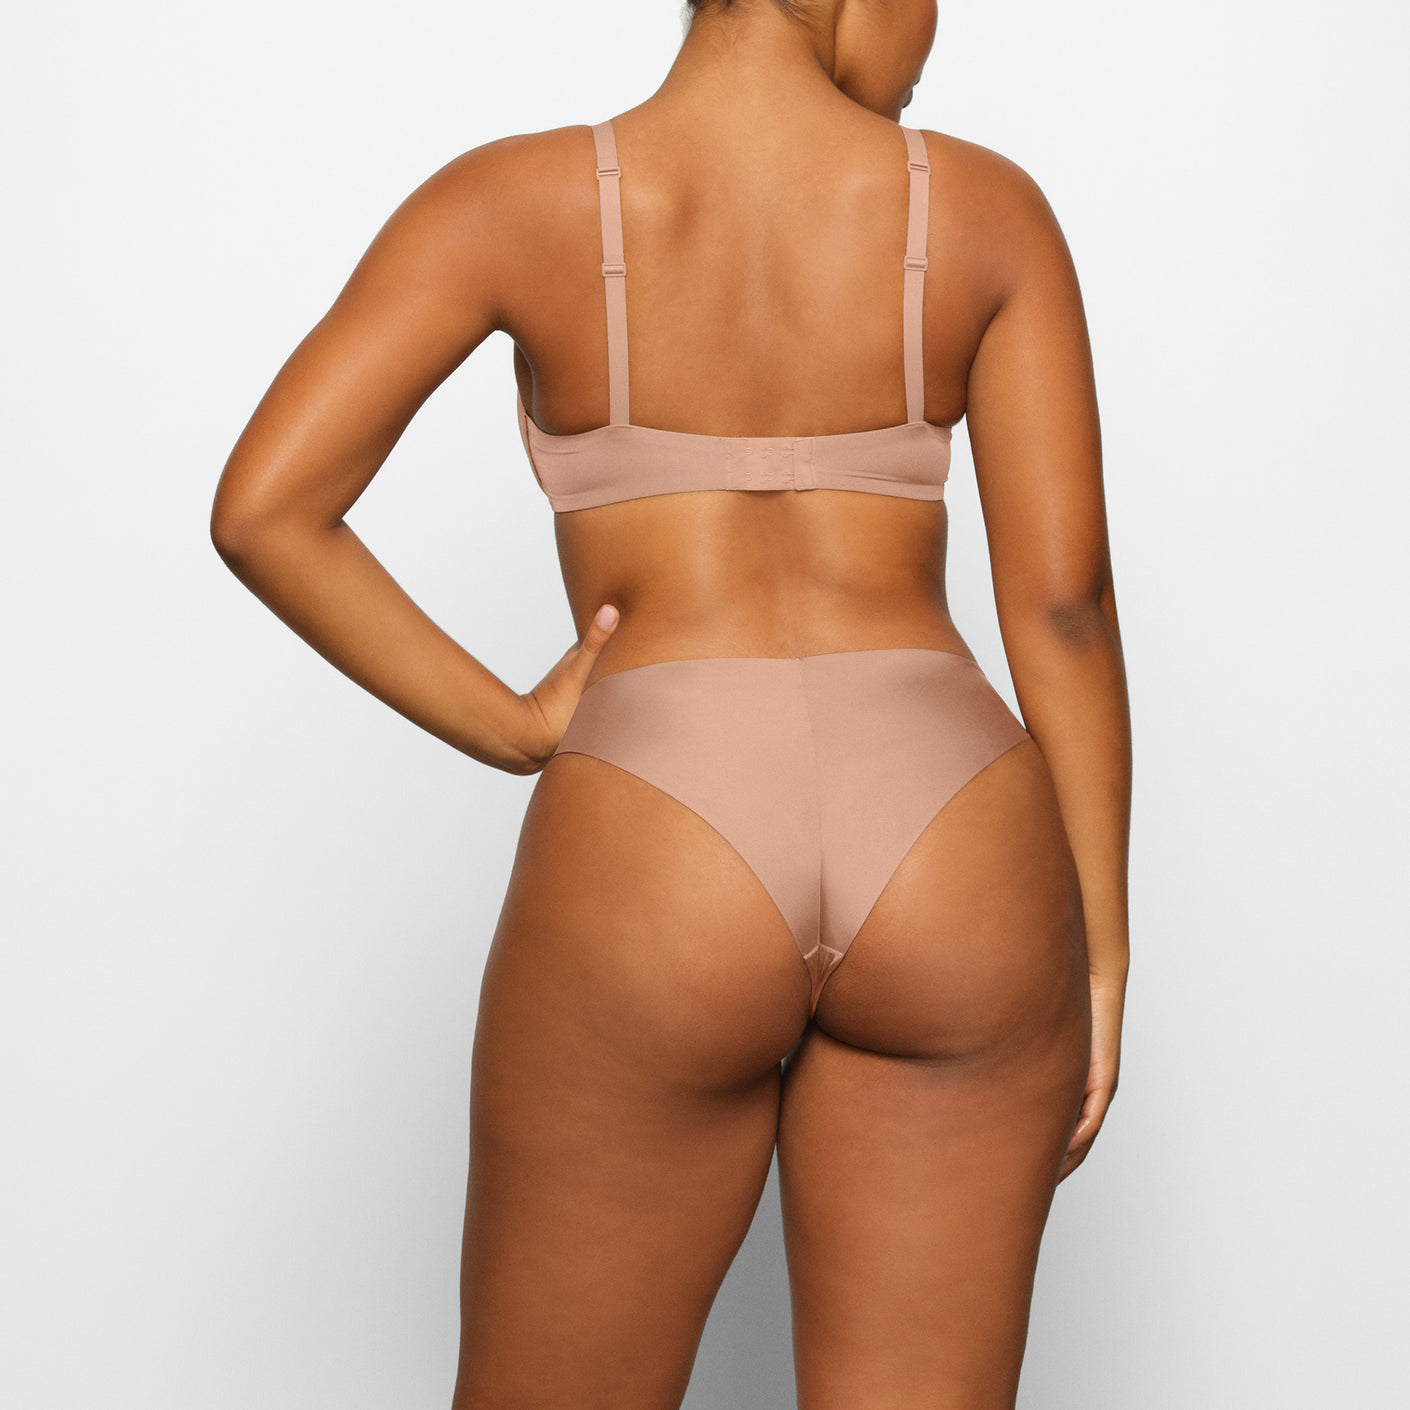 SKIMS Wireless Form Push Up Plunge Bra in Clay Size 32D Tan - $47 - From  Cady